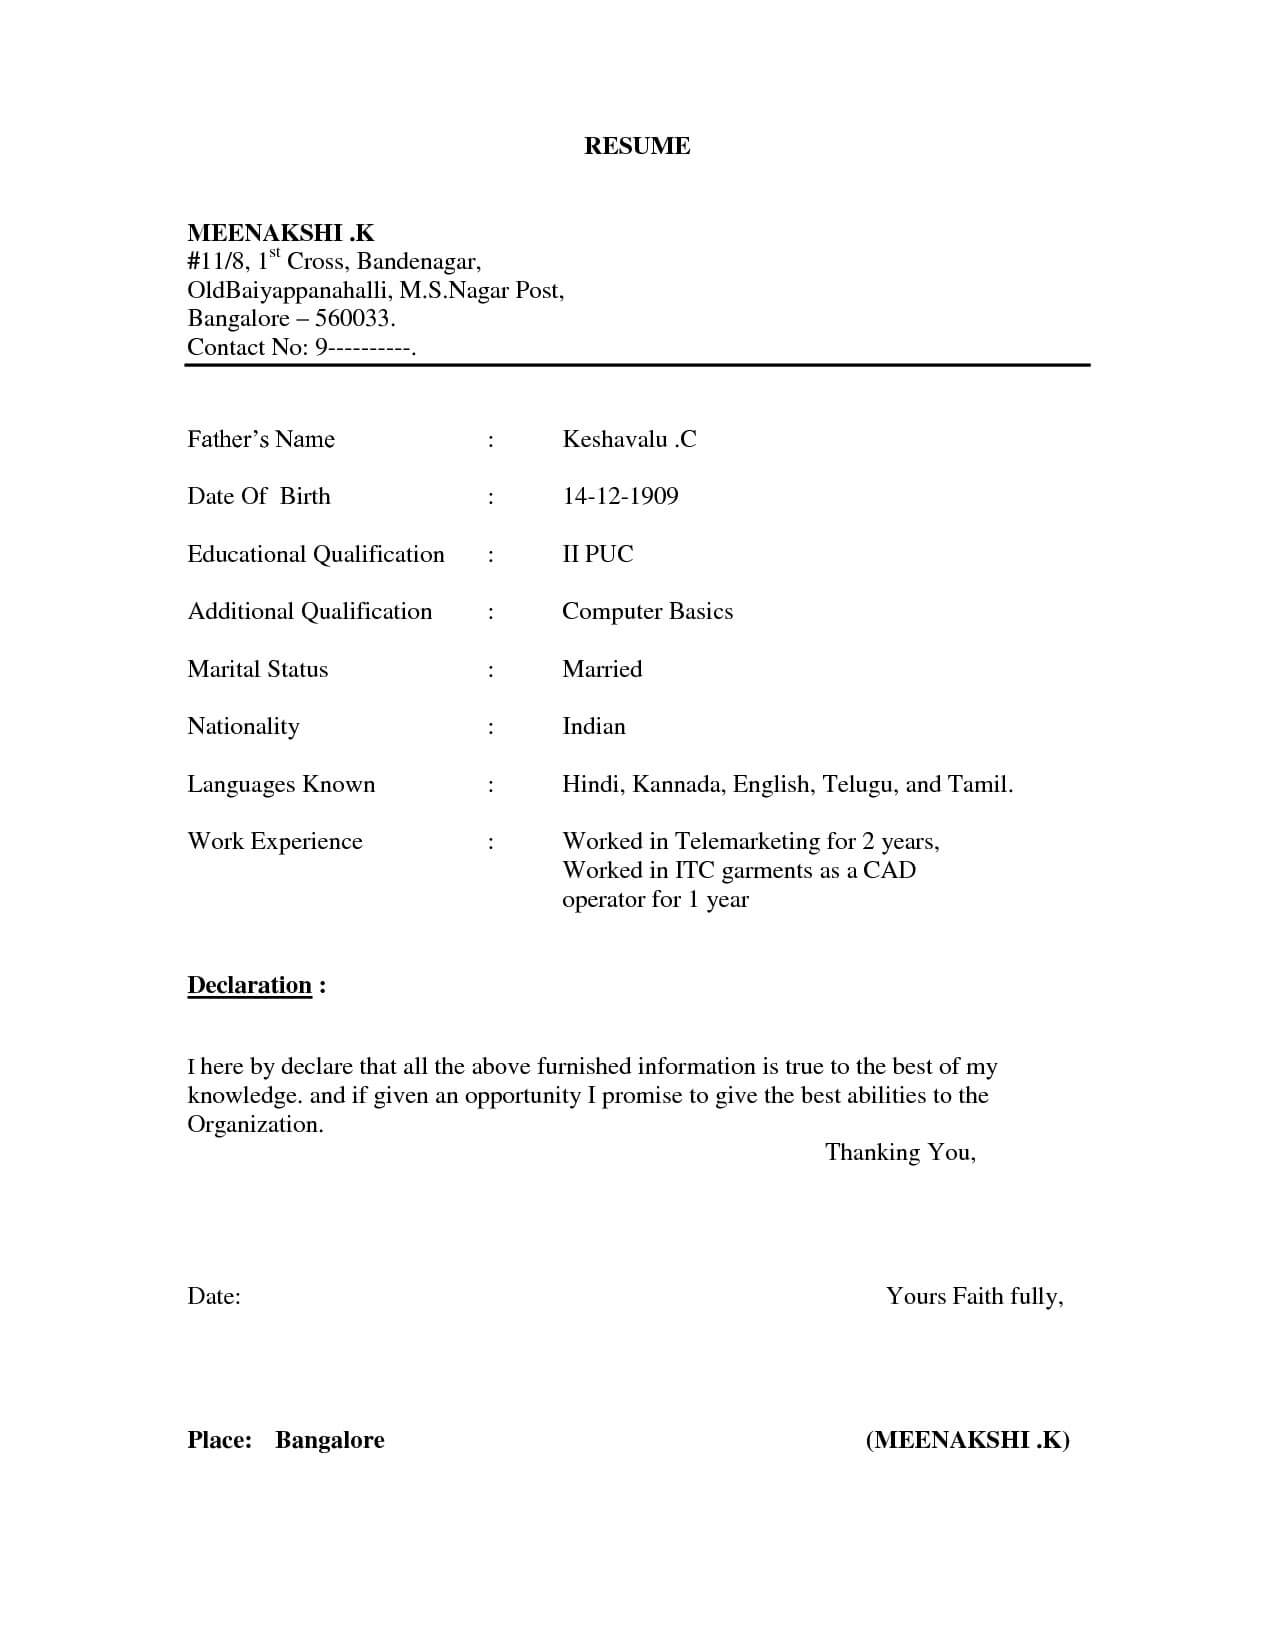 Resume ~ Veryimple Resume Examples Fortudents In Within Simple Resume Template Microsoft Word